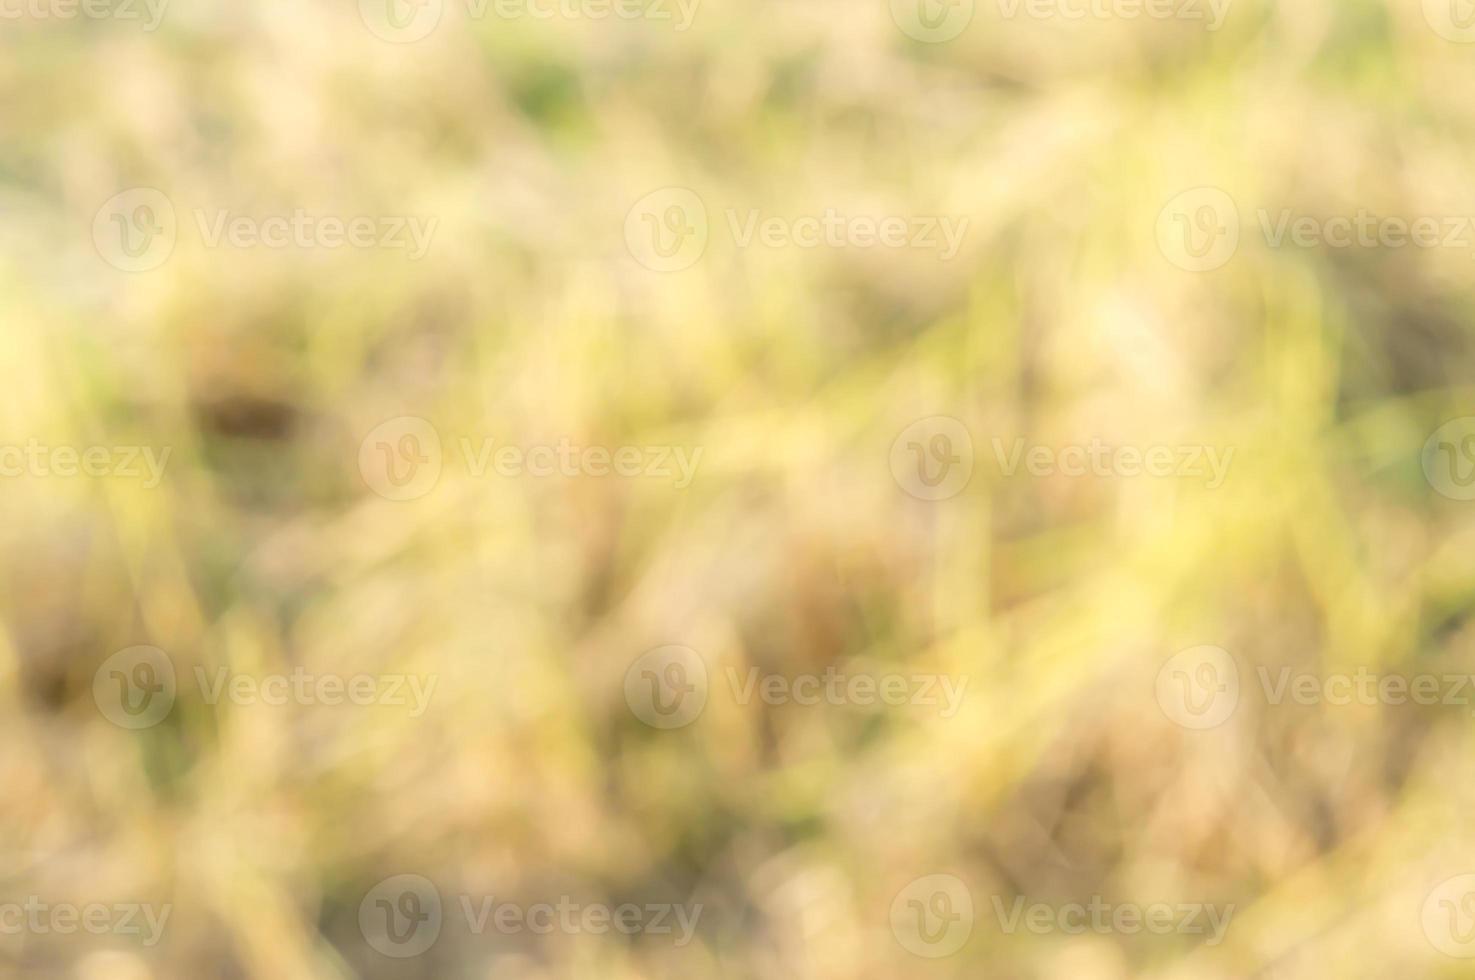 Blurred ripe paddy field or brown nature background texture used as website theme or template or for decorative art work photo